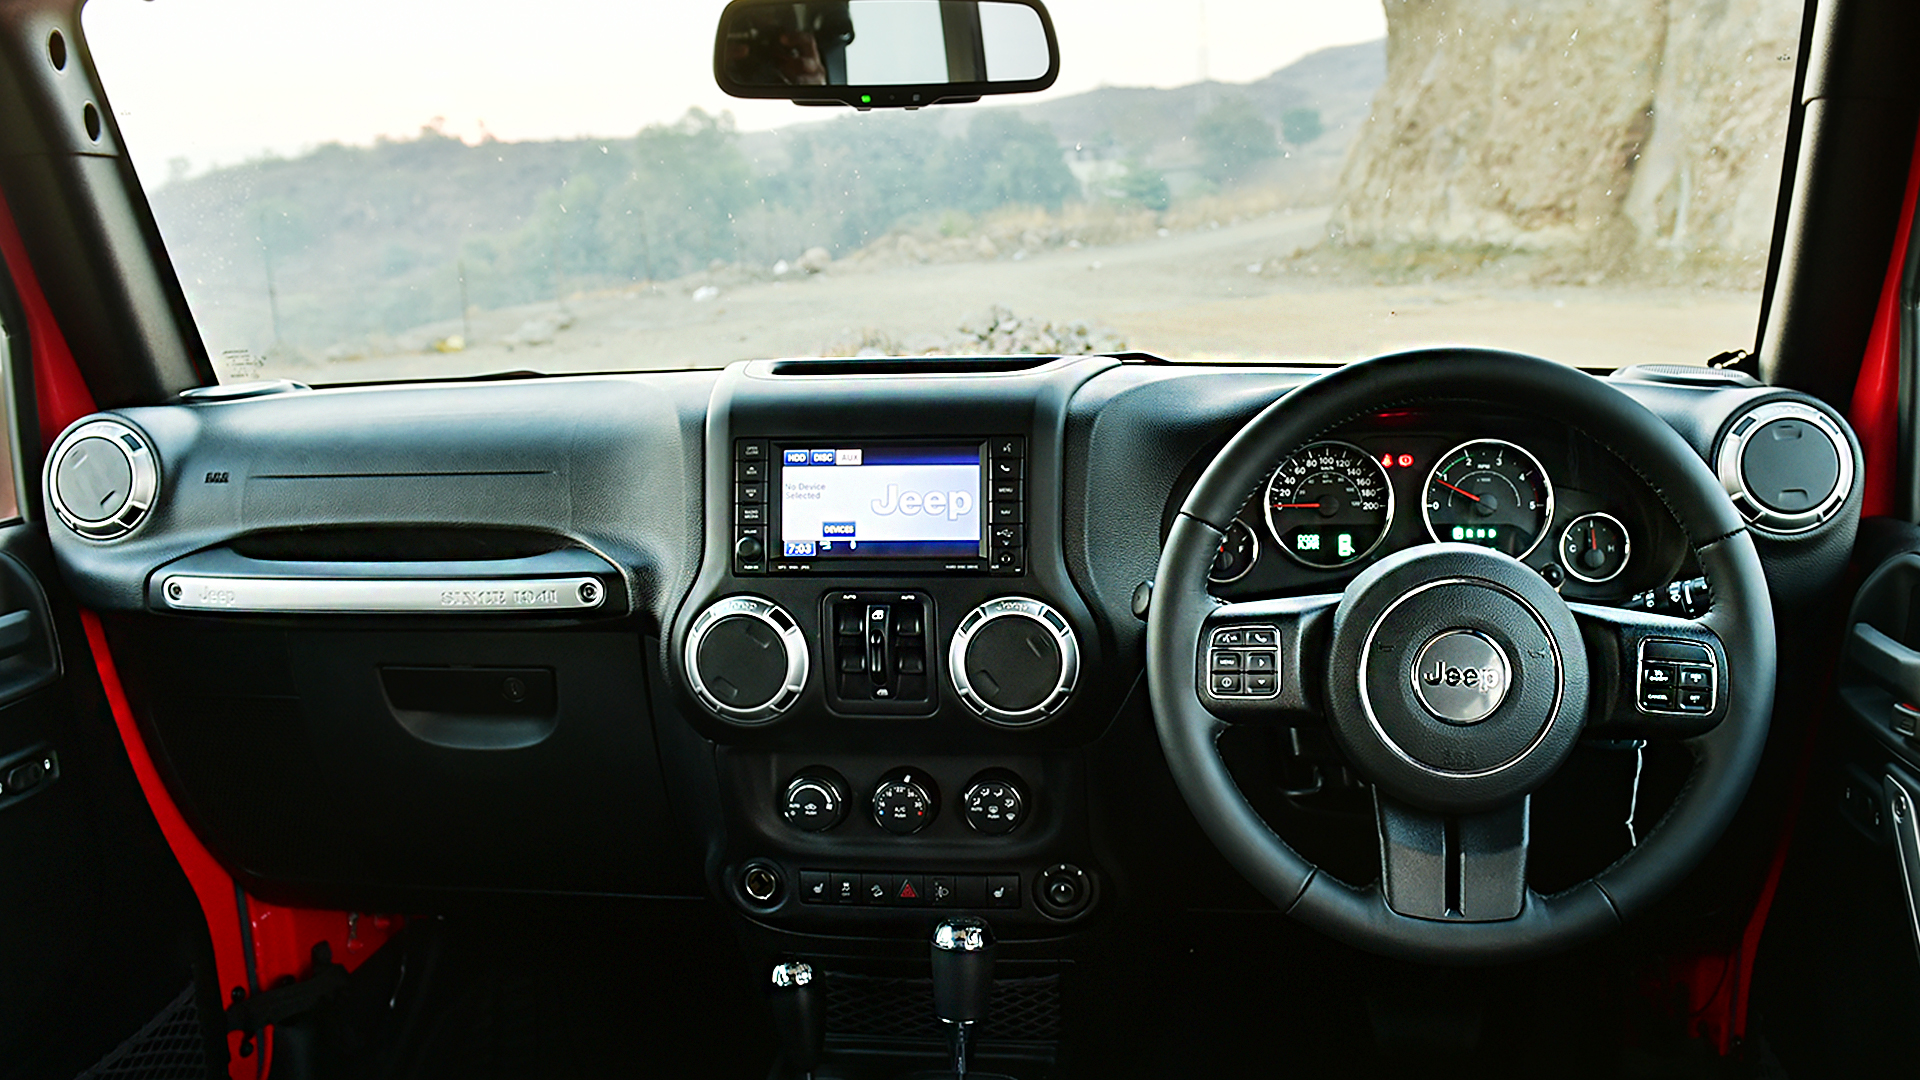 Jeep Wrangler 2016 Unlimited Interior Car Photos Overdrive